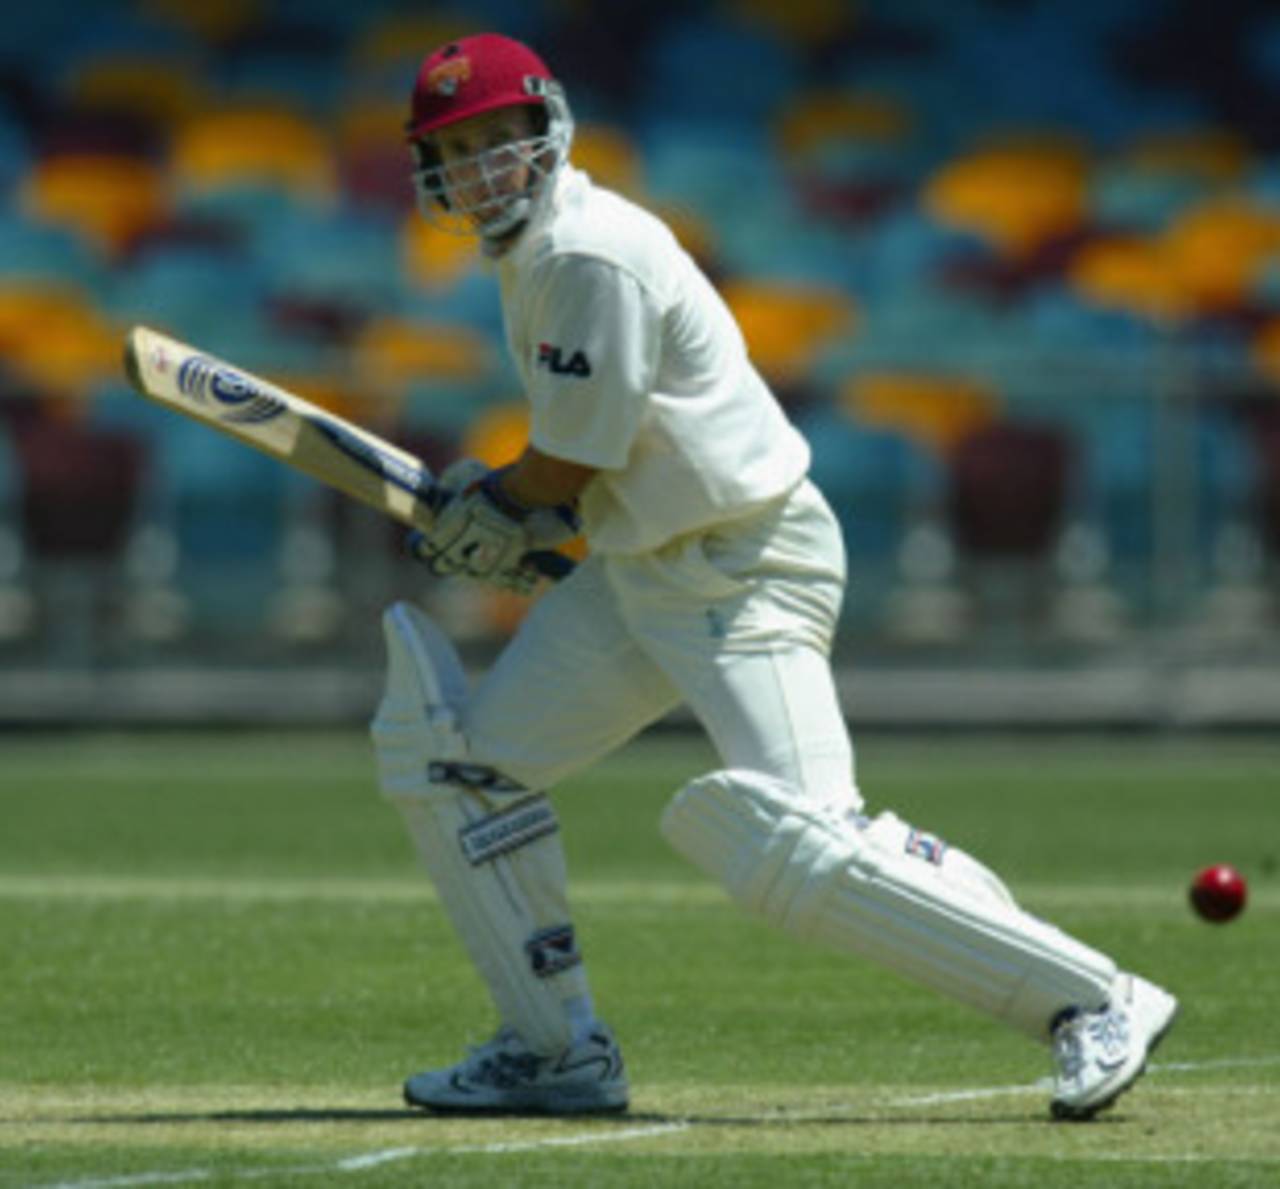 Brendan Nash guides the ball behind square, Queensland v New South Wales, Pura Cup, Brisbane, October 16, 2002